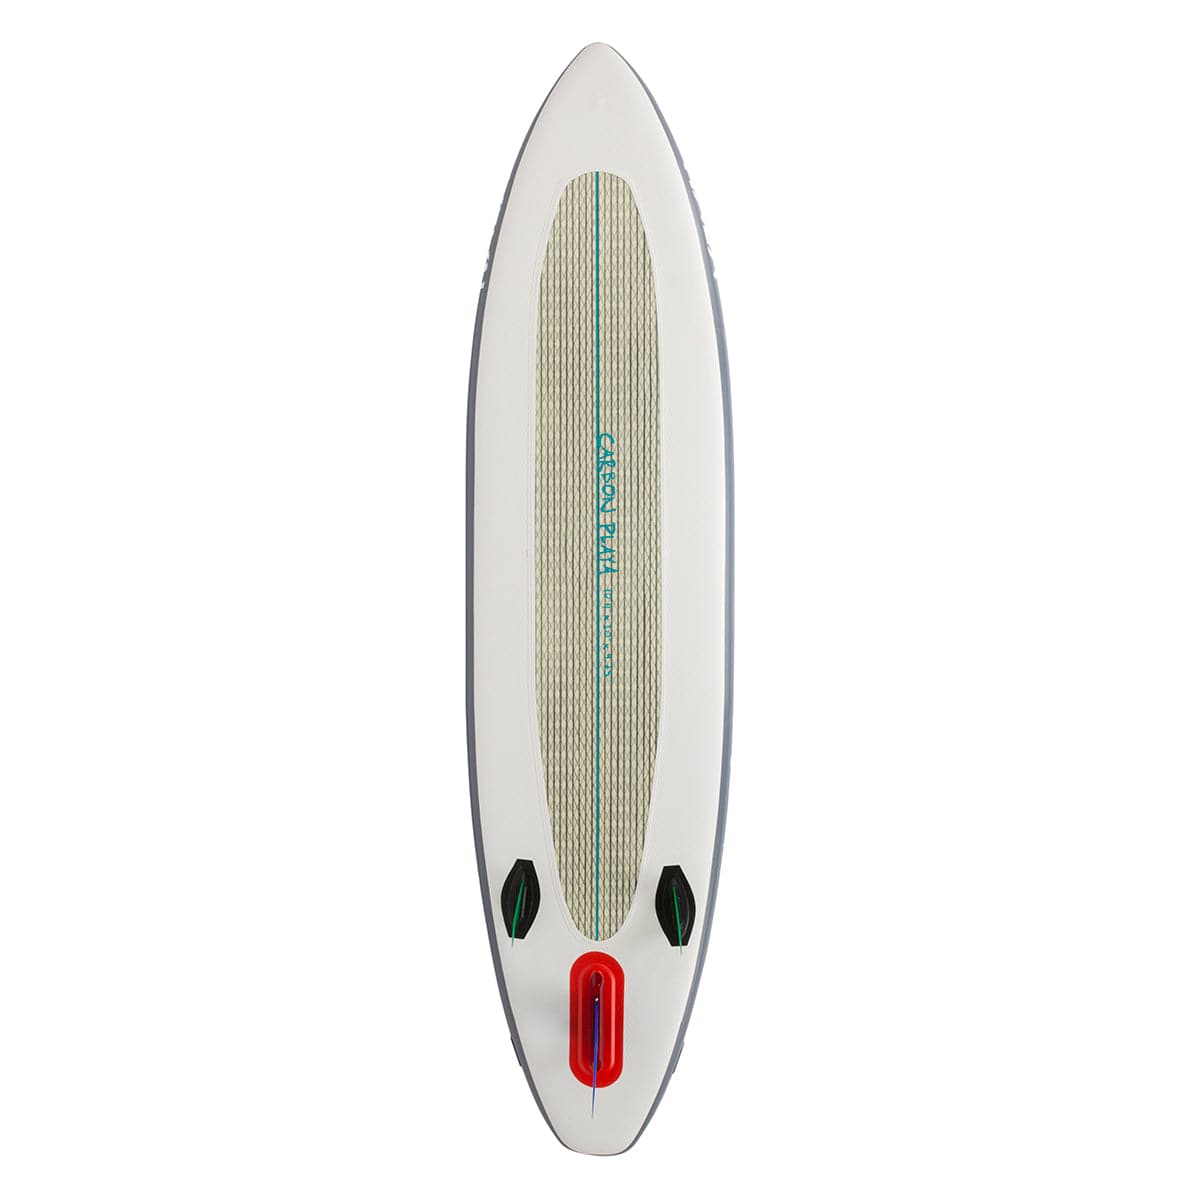 Featuring the Carbon Playa 10'11 Inflatable SUP inflatable sup manufactured by Hala shown here from a second angle.